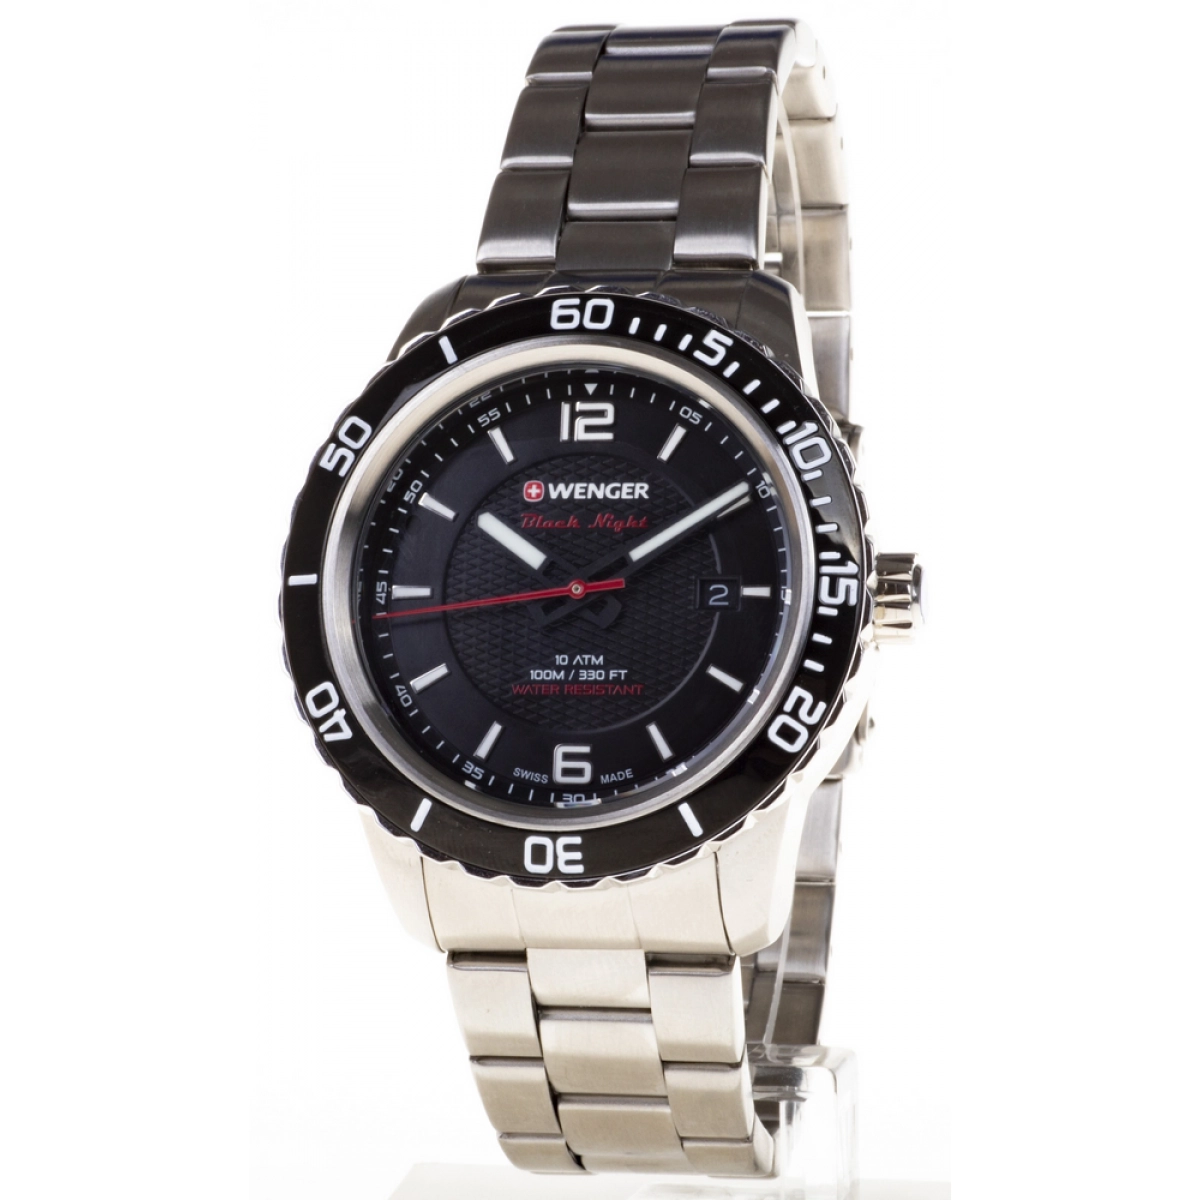 WATCH WENGER STEEL BLACK DIAL BOLTS FLORESCENTE, SAPPHIRE CRYSTAL 01.0851.122